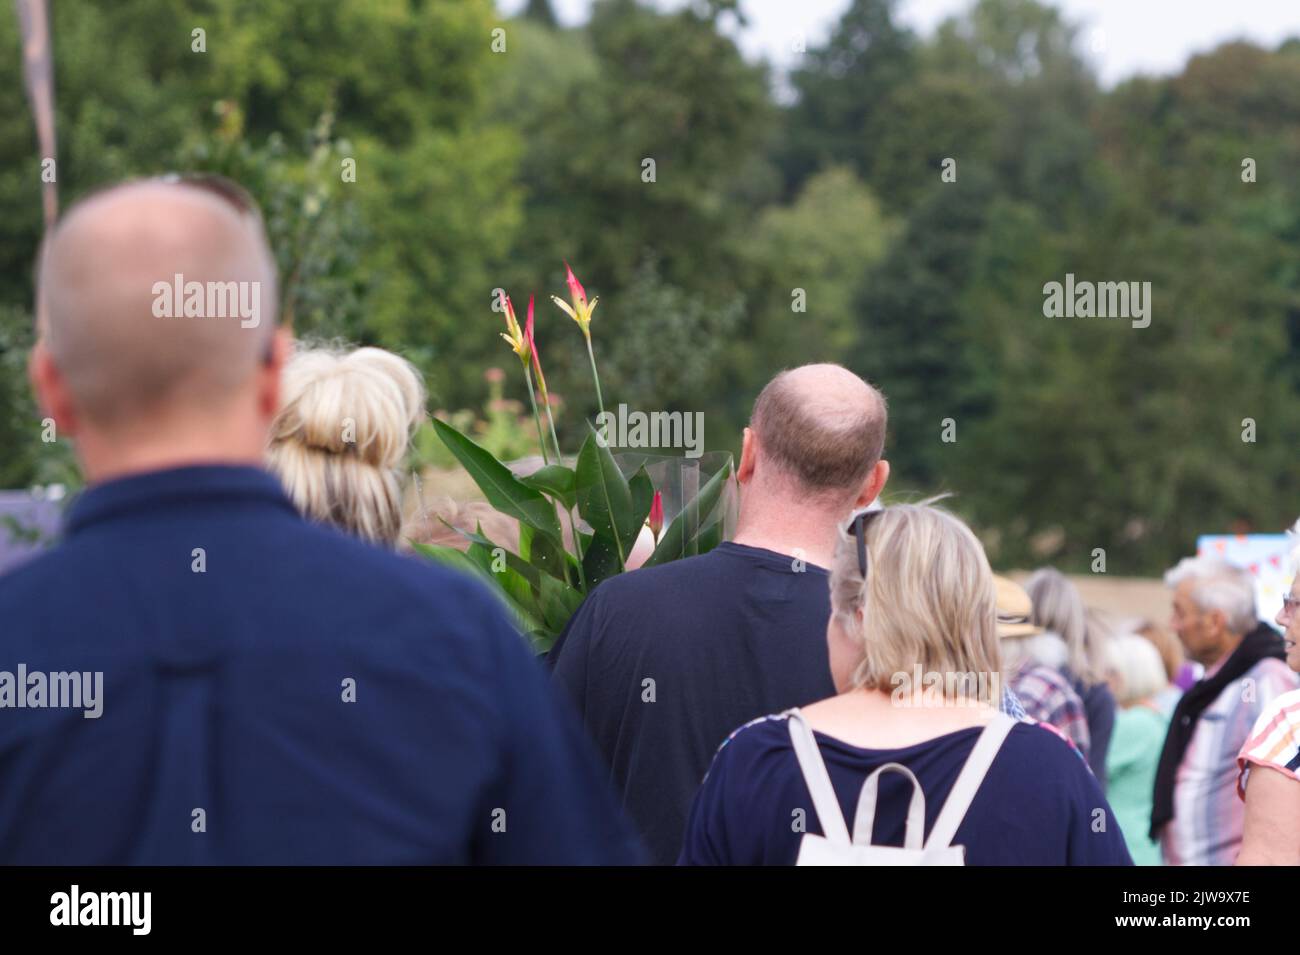 People at the inaugural Gardeners World Autumn Fair 2022 held at Audley End in Essex. A plant being carried around. Stock Photo